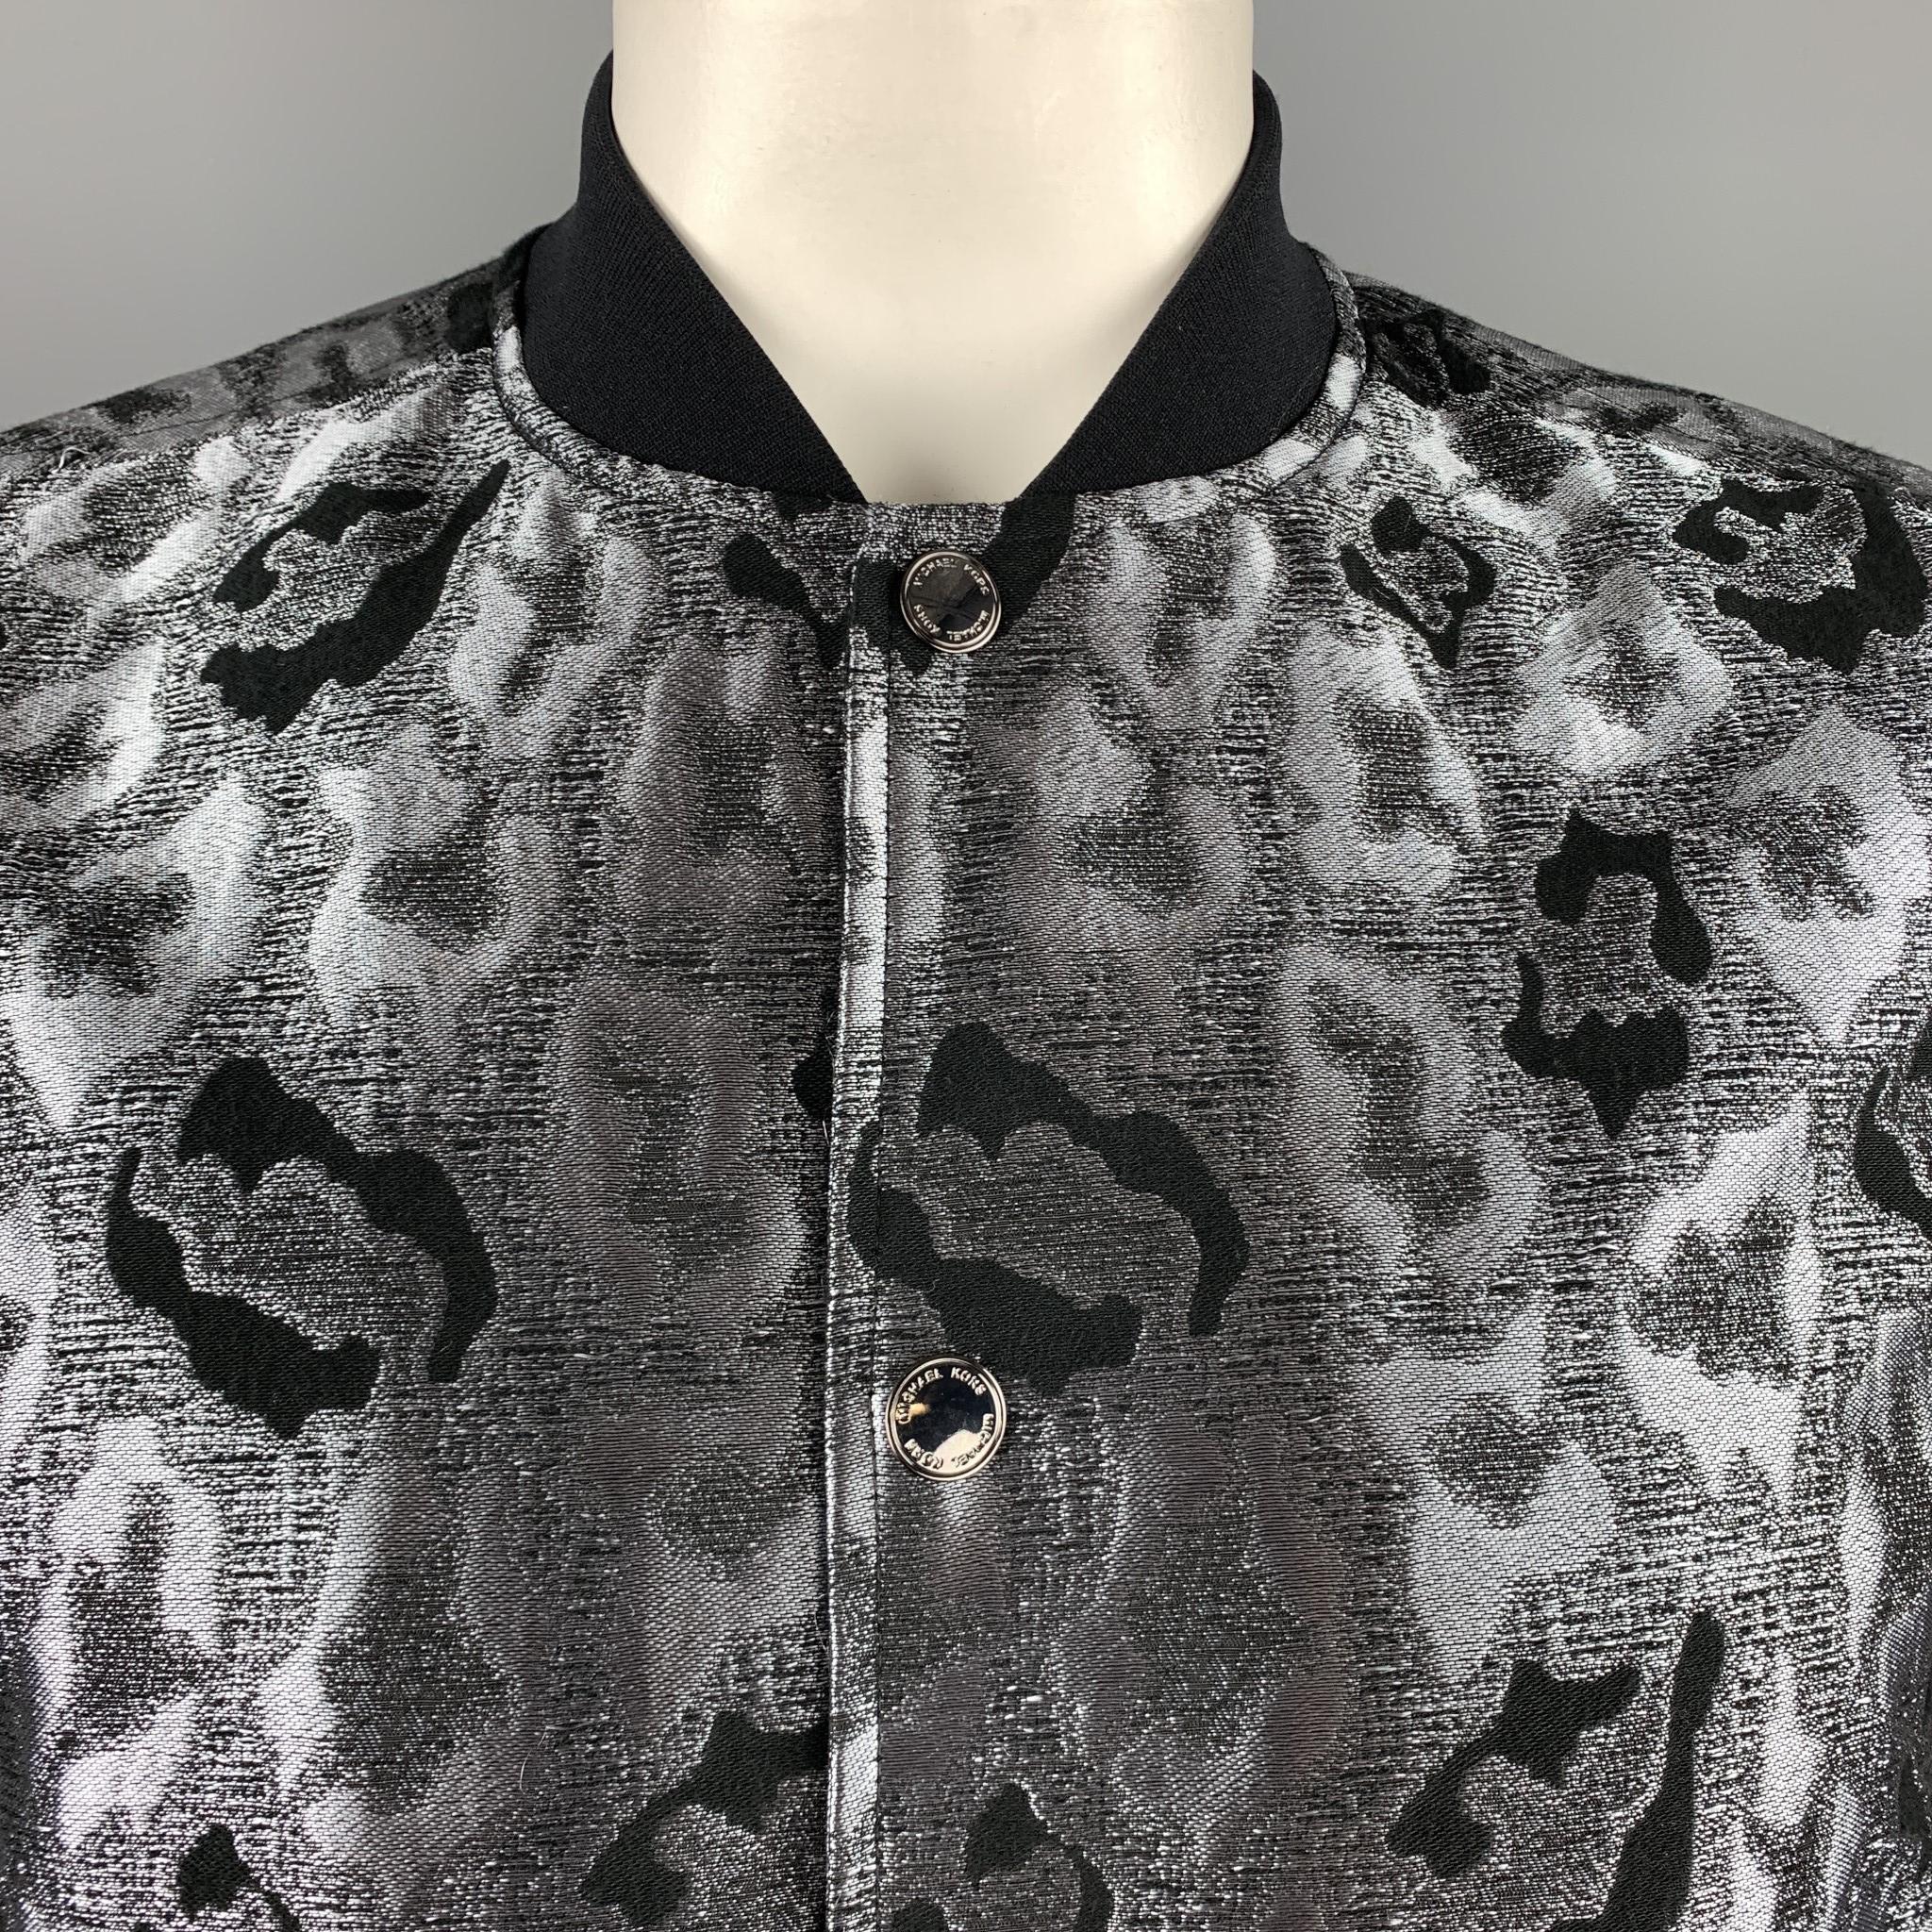 MICHAEL KORS jacket comes in silver and black silk blend leopard print jacquard with a baseball collar and snap closures. 

Excellent Pre-Owned Condition.
Marked: M

Measurements:

Shoulder: 17 in.
Chest: 44 in.
Sleeve: 26.5 in.
Length: 26.5 in.